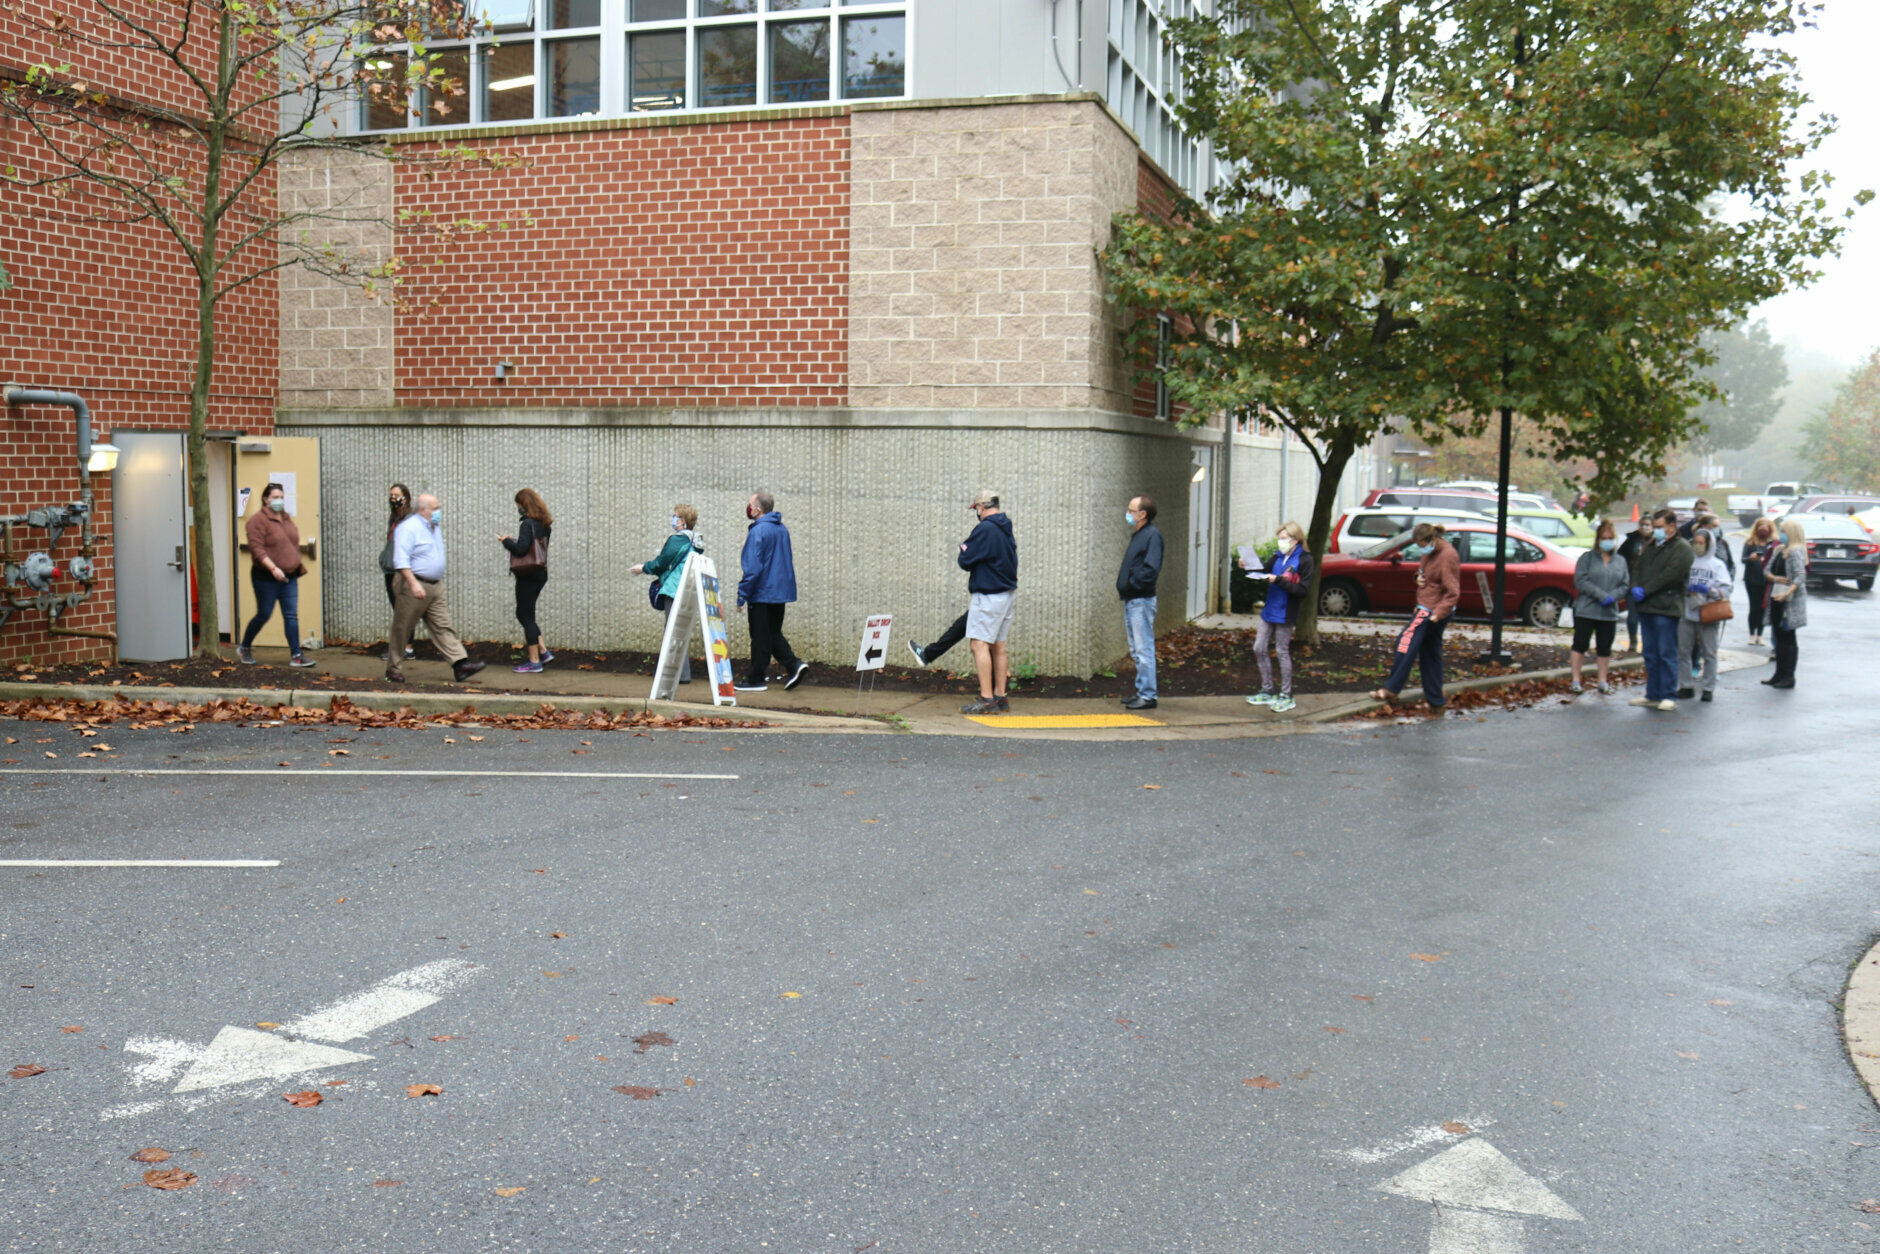 Voters wait in line to enter the Pip Moyer Recreation Center, Monday, Oct. 26, 2020 in Annapolis, Md., on the first day of in-person early voting in the state. (AP Photo/Brian Witte)